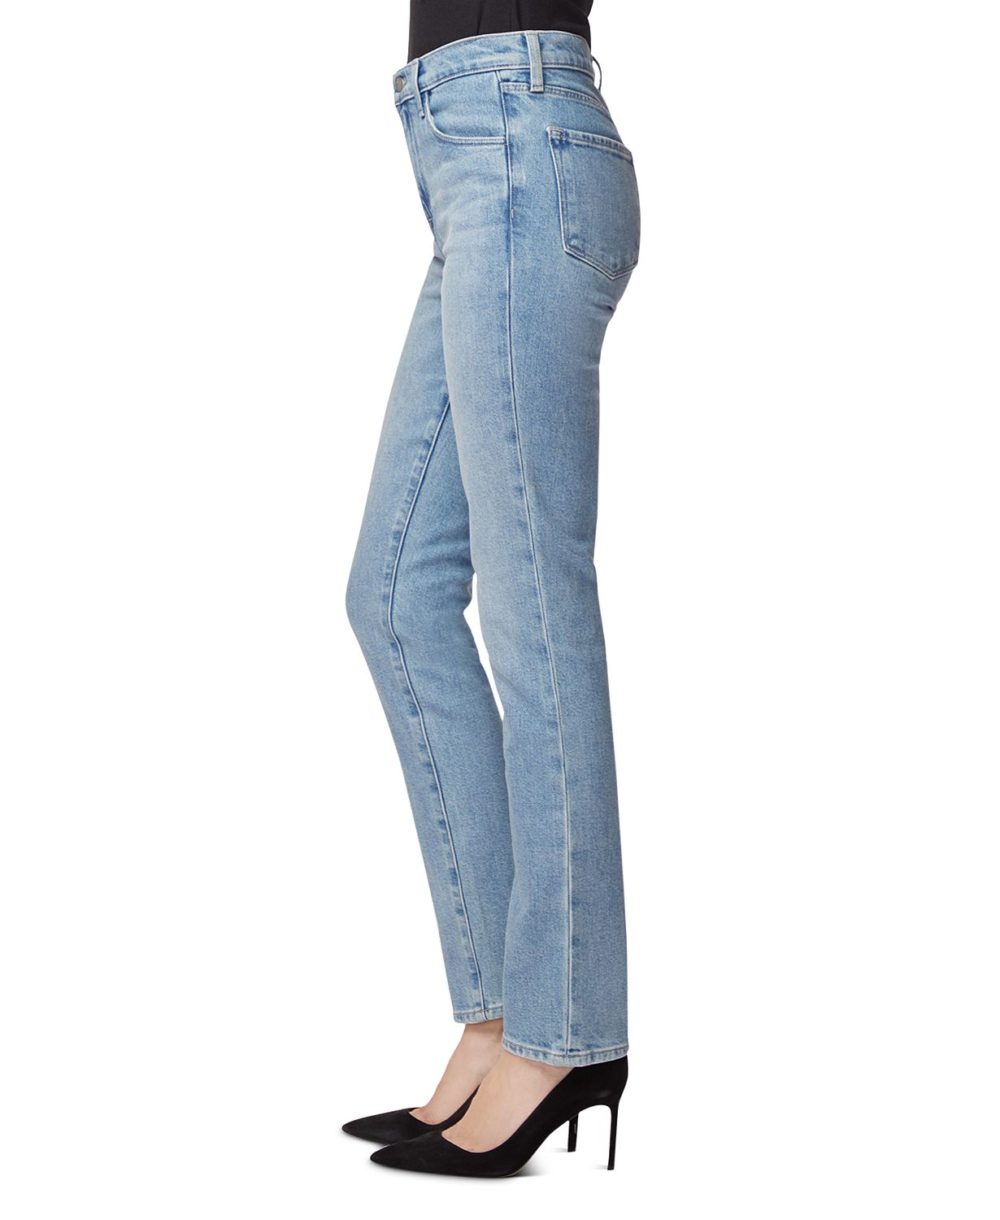 woocommerce-673321-2209615.cloudwaysapps.com-j-brand-womens-marcella-ruby-high-rise-cigarette-jeans